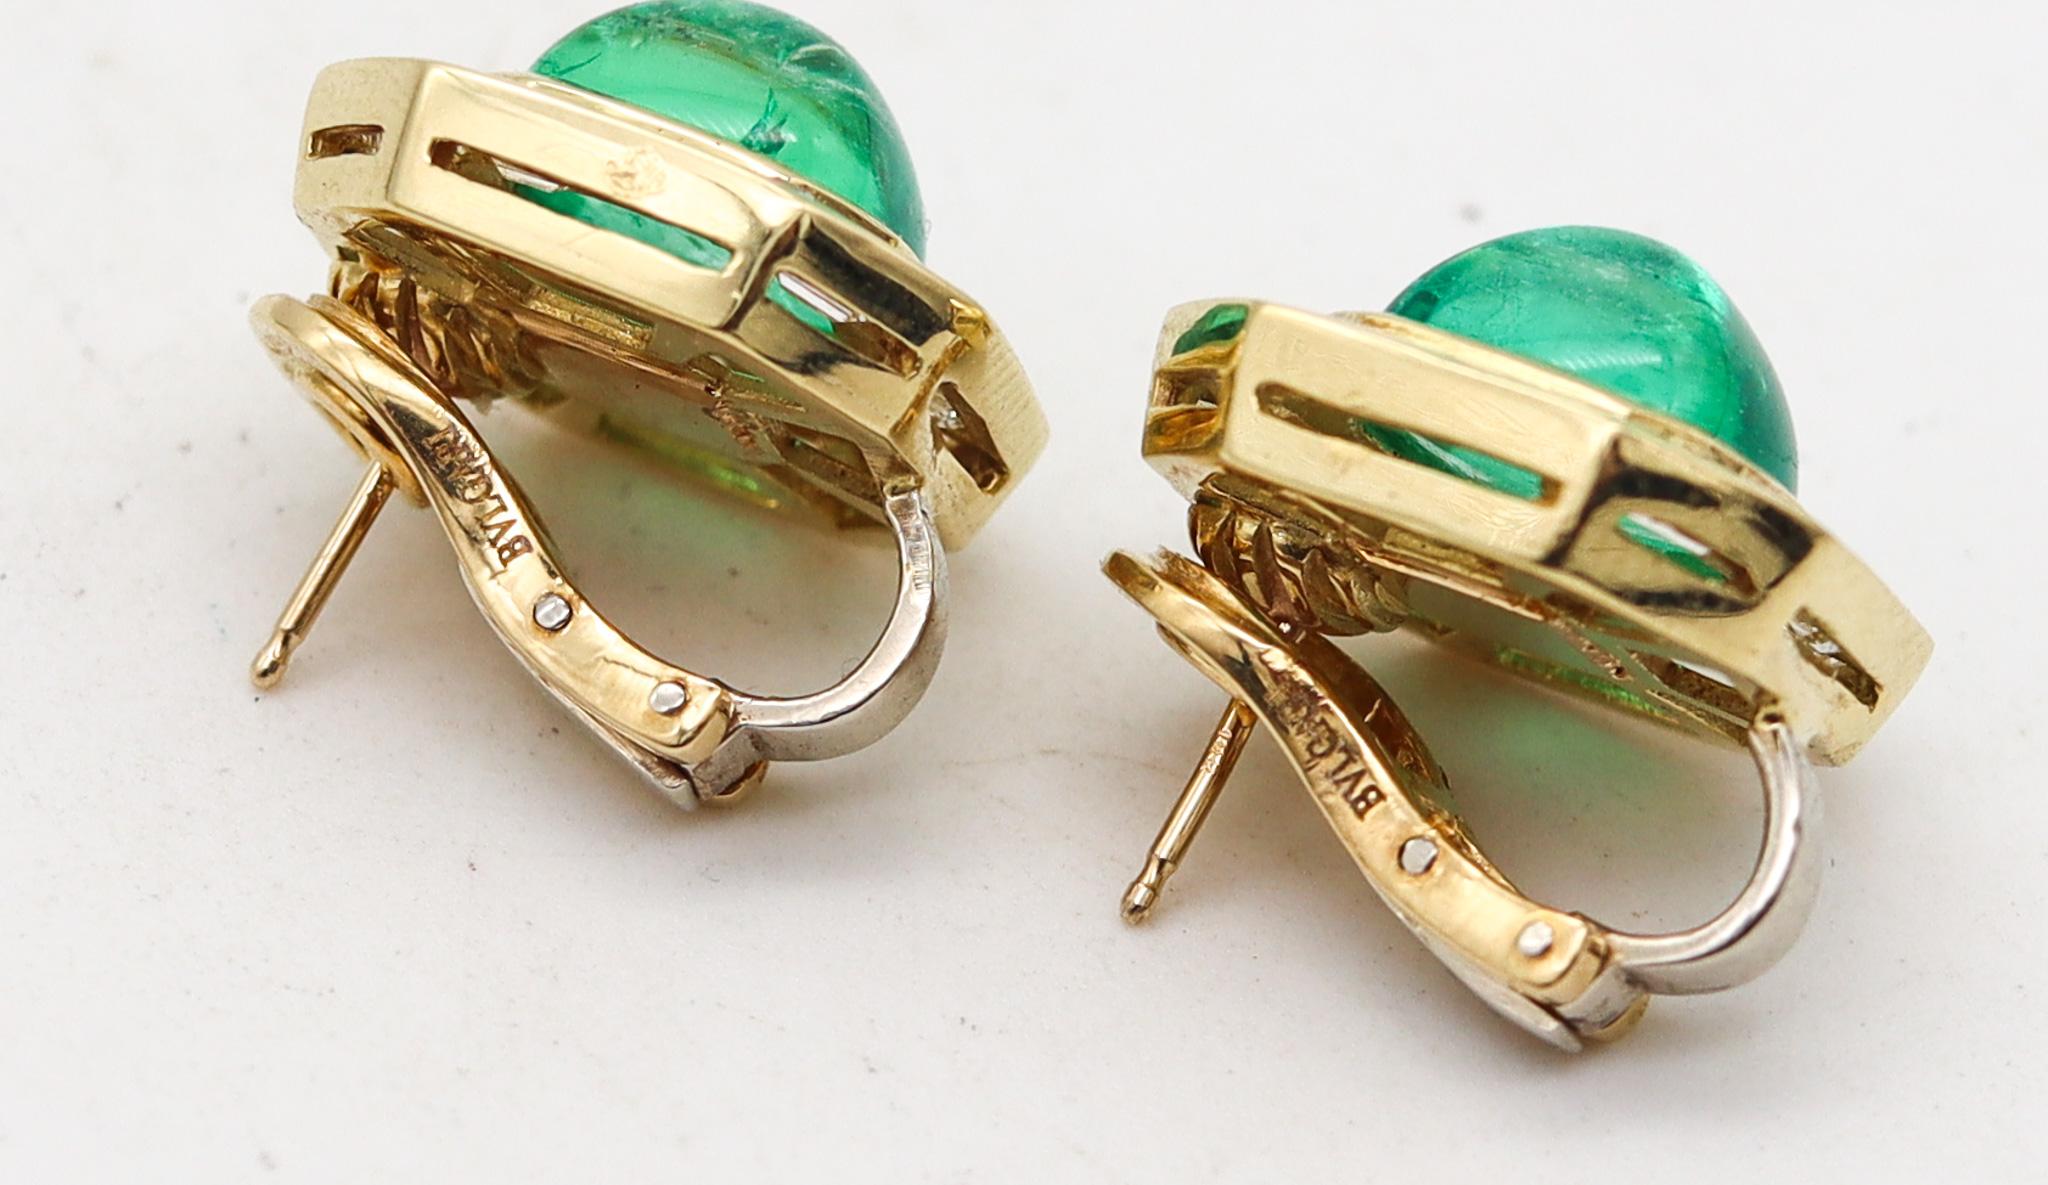 Modern Bvlgari Clip On Earrings In 18Kt Gold With 11.72 Ctw In Diamonds And Emeralds